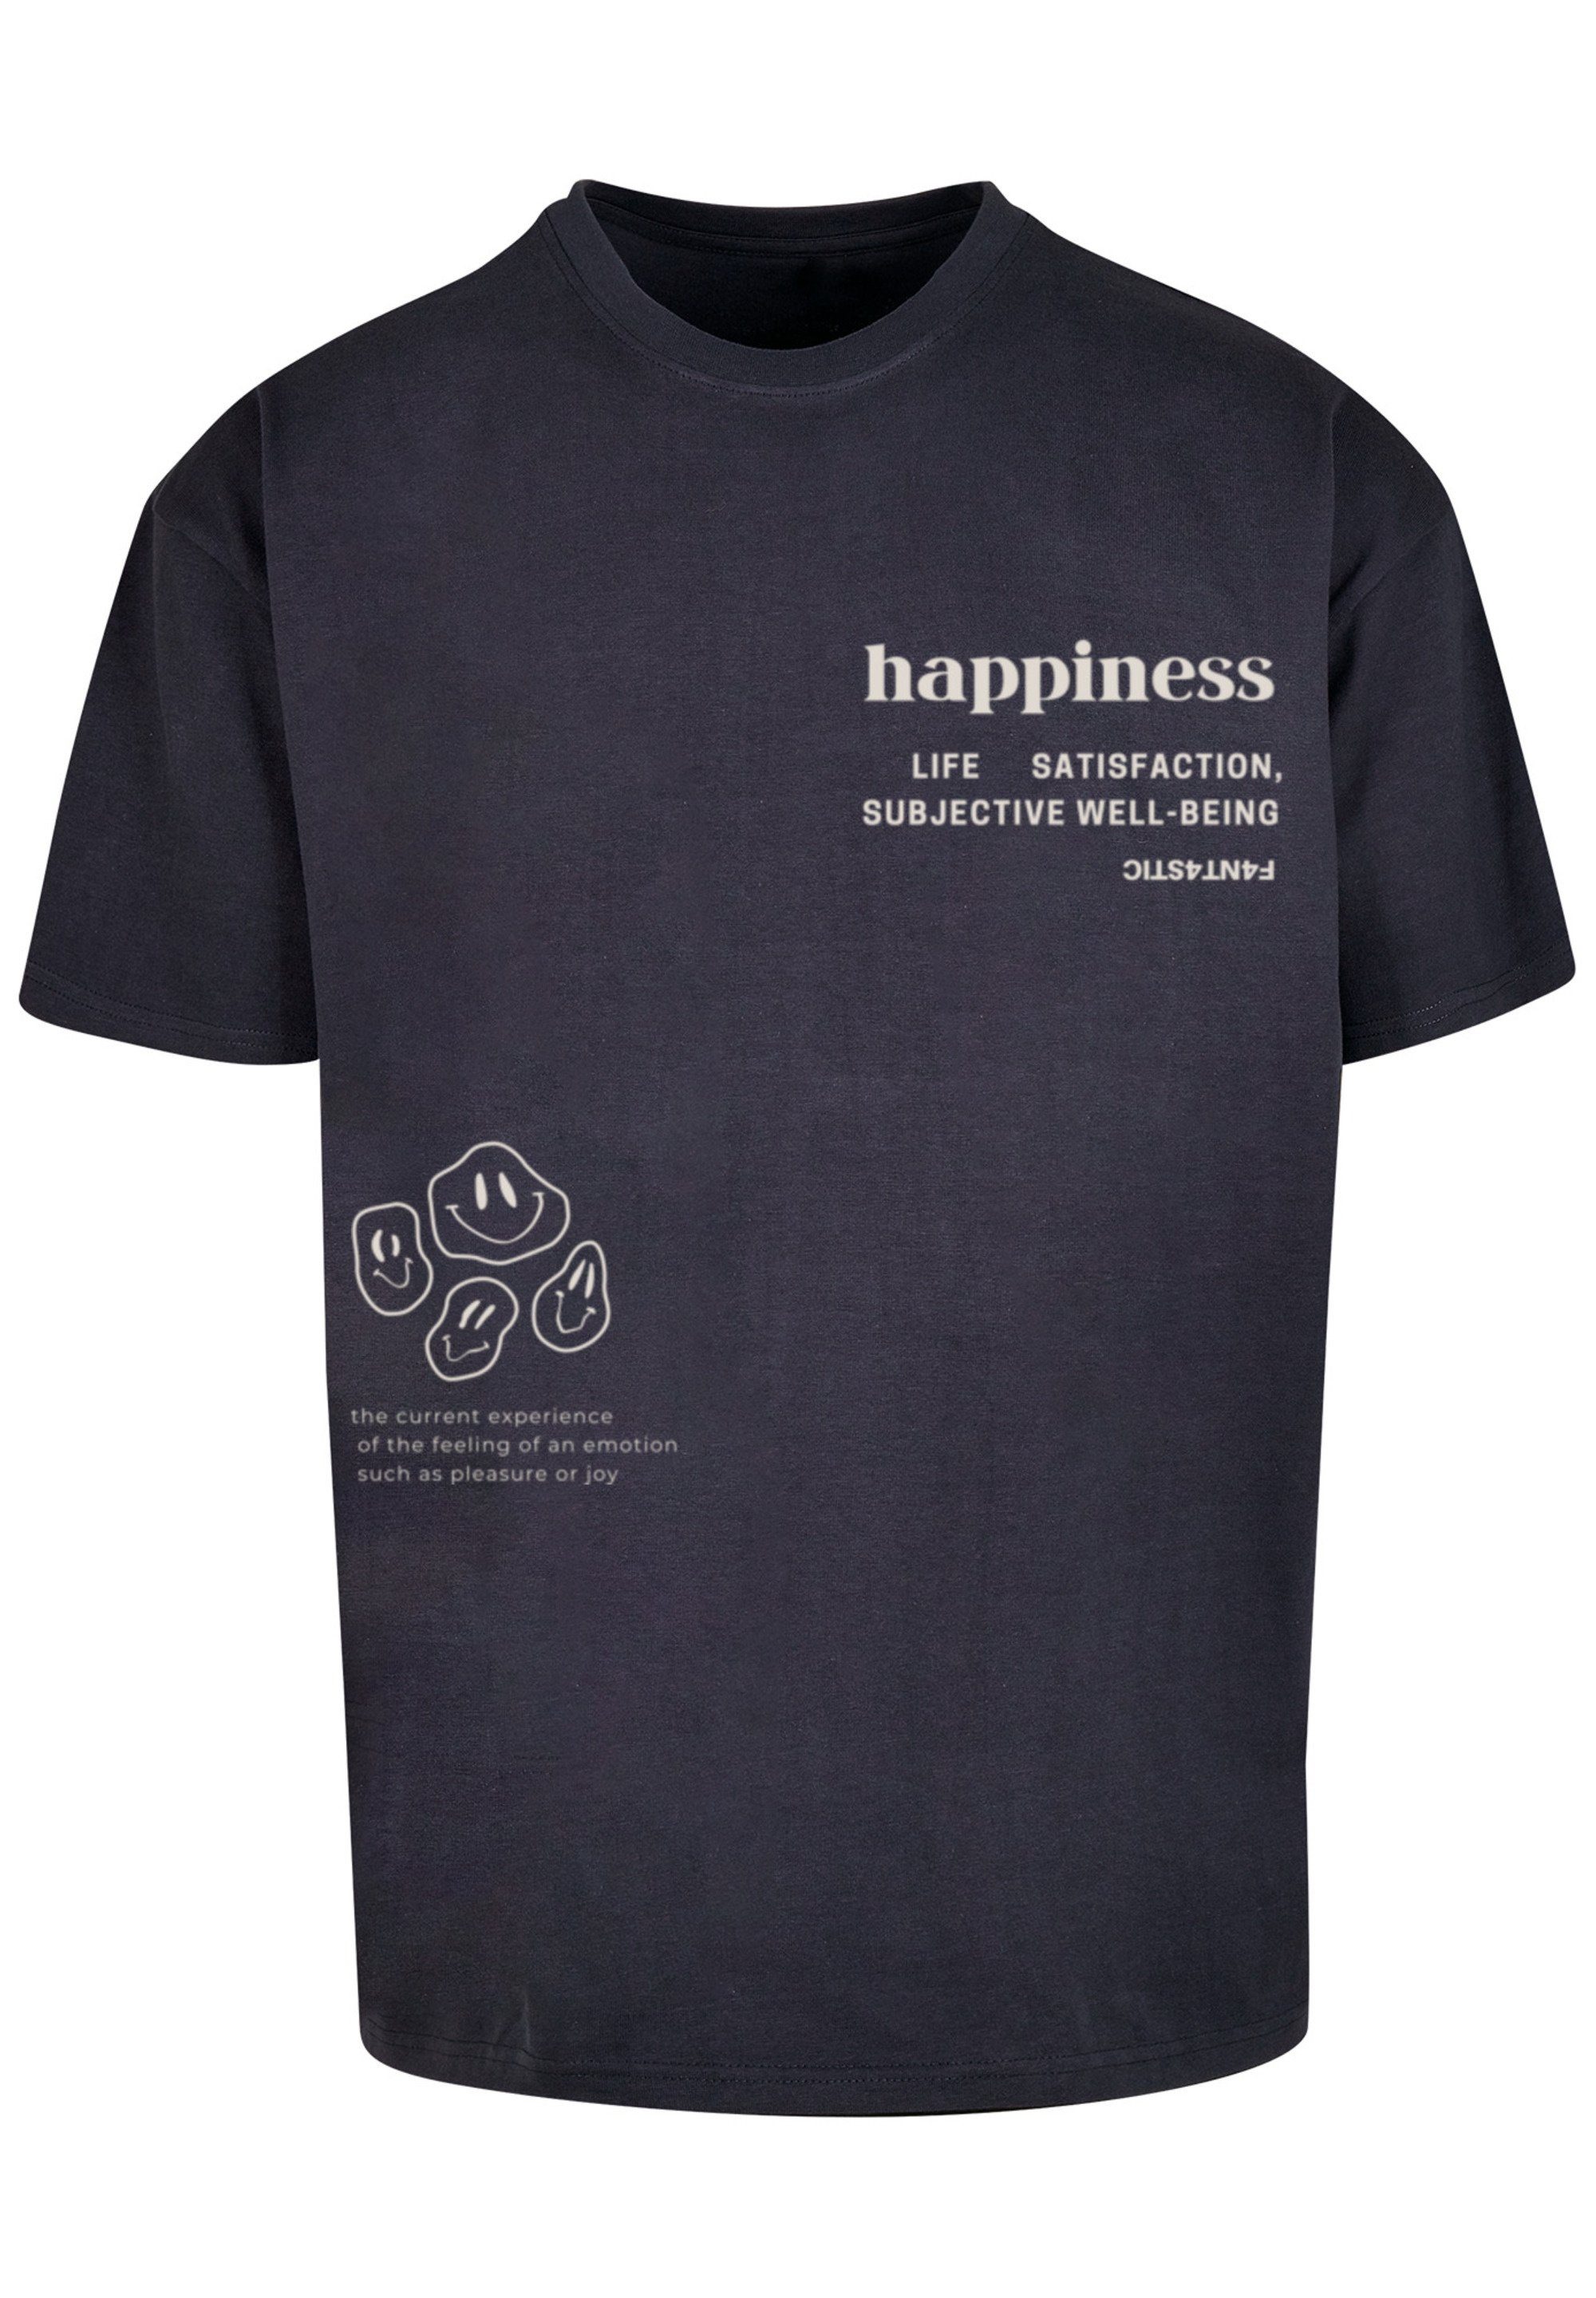 T-Shirt navy Print OVERSIZE TEE F4NT4STIC happiness